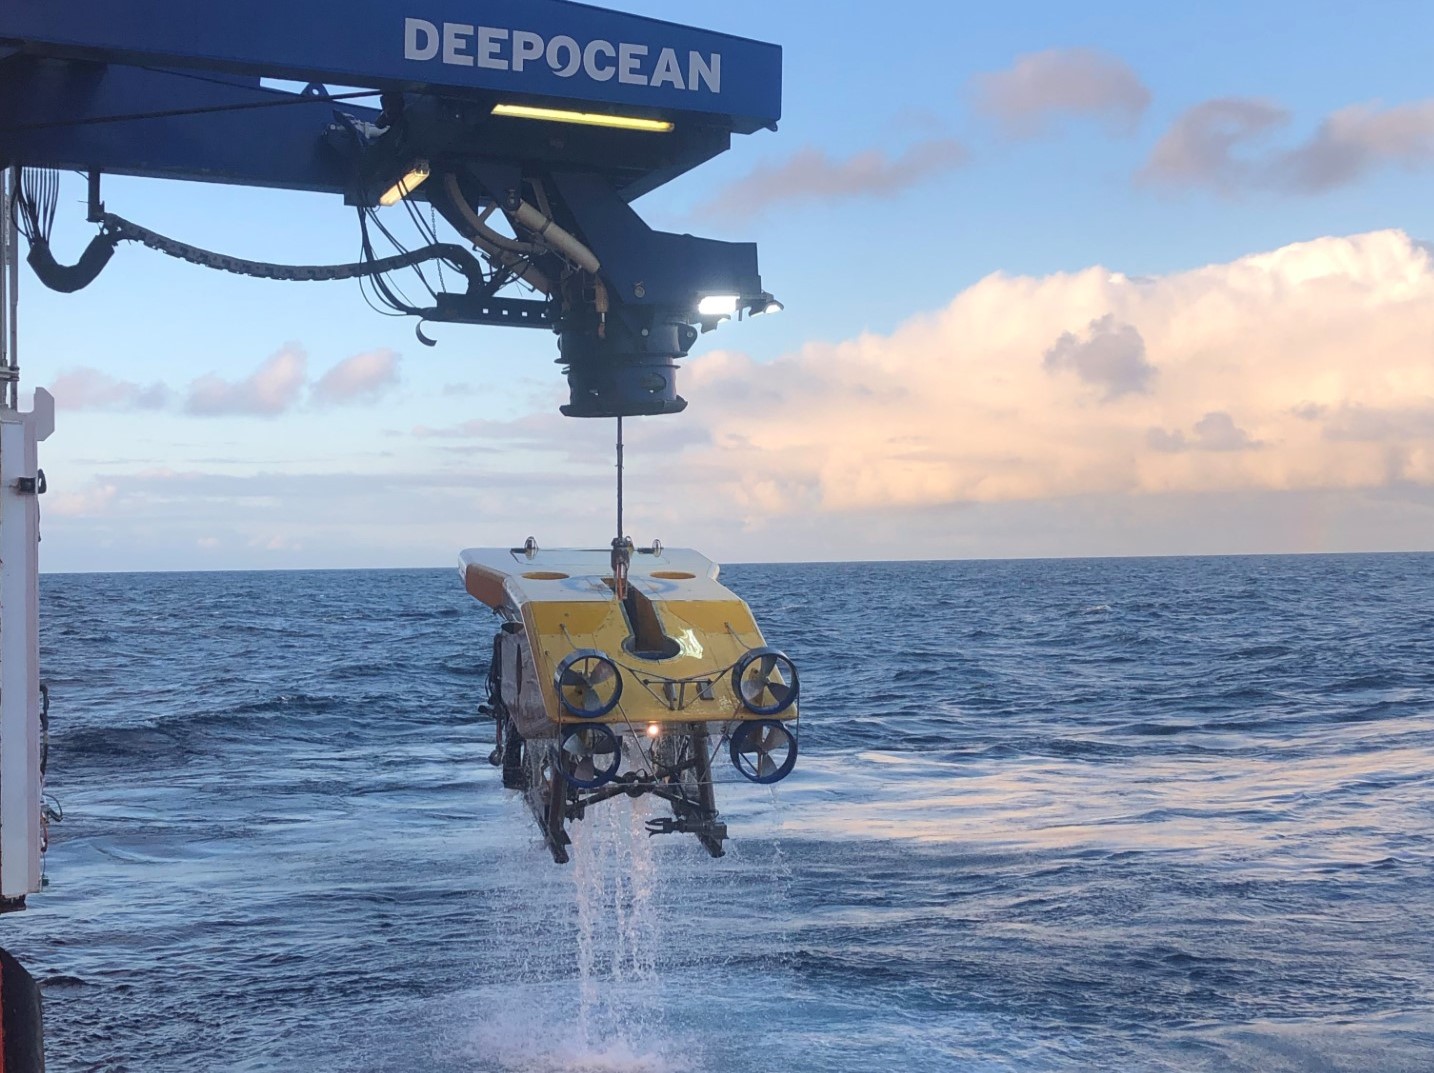 Superior Survey ROV that will perform subsea survey work. DeepOcean and Equinor